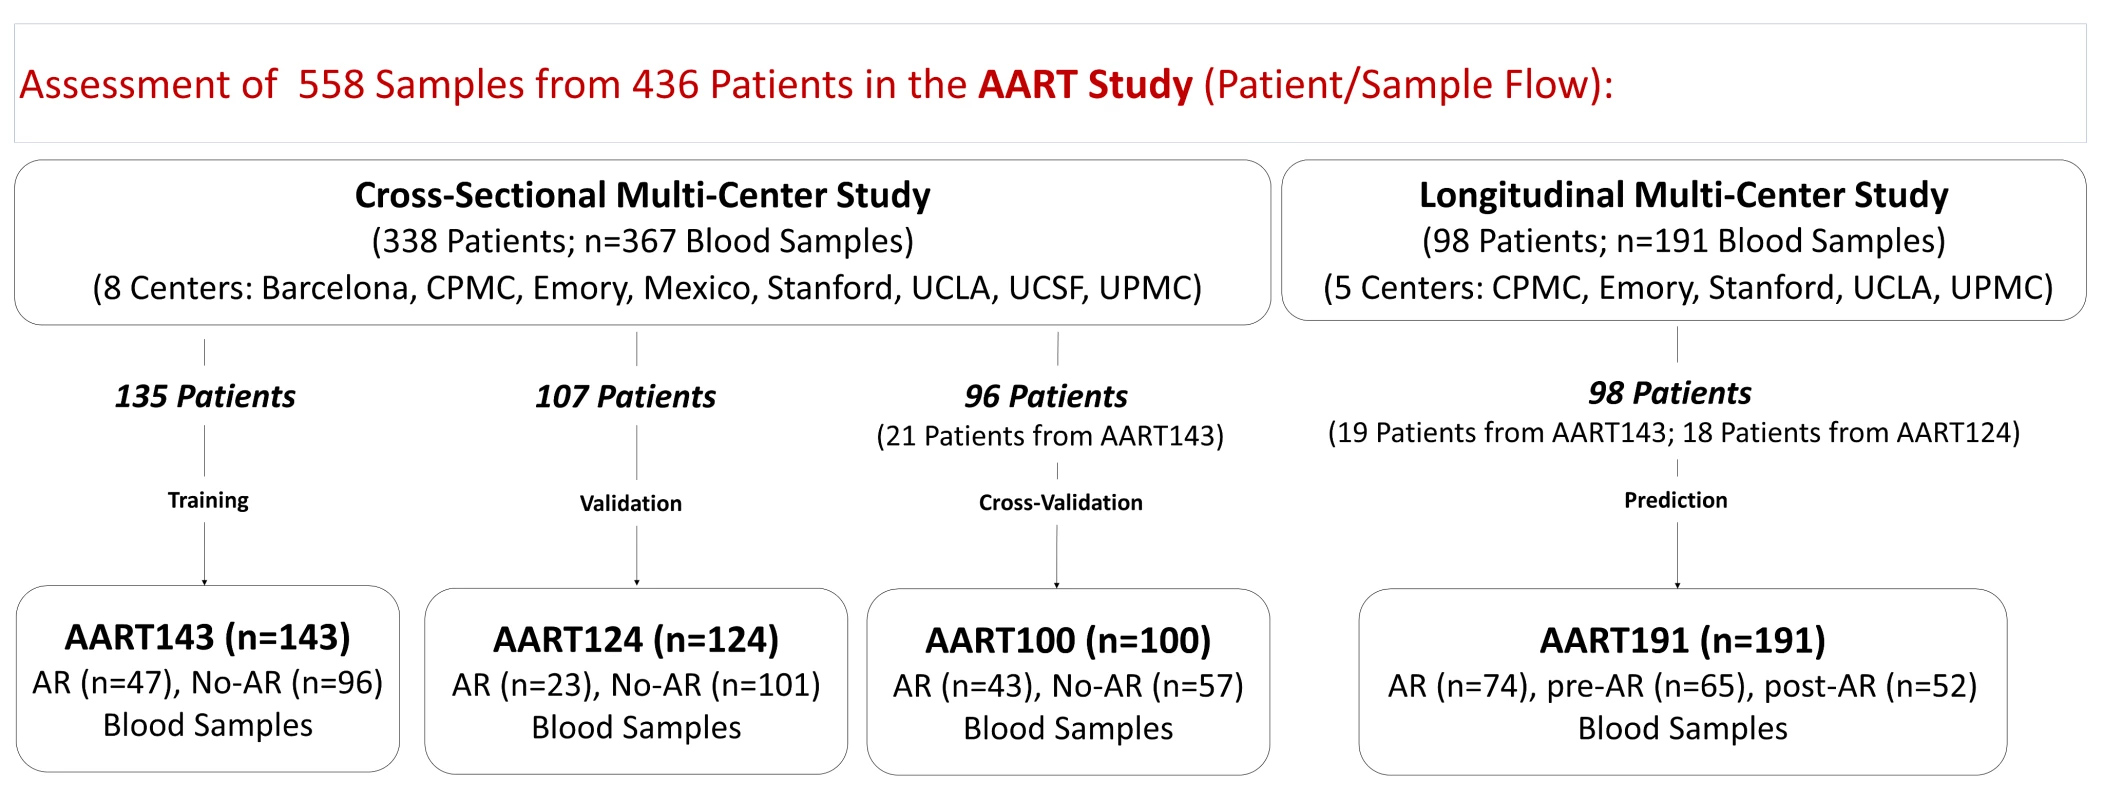 AART study design in 436 unique adult/pediatric renal transplant patients from eight transplant centers.